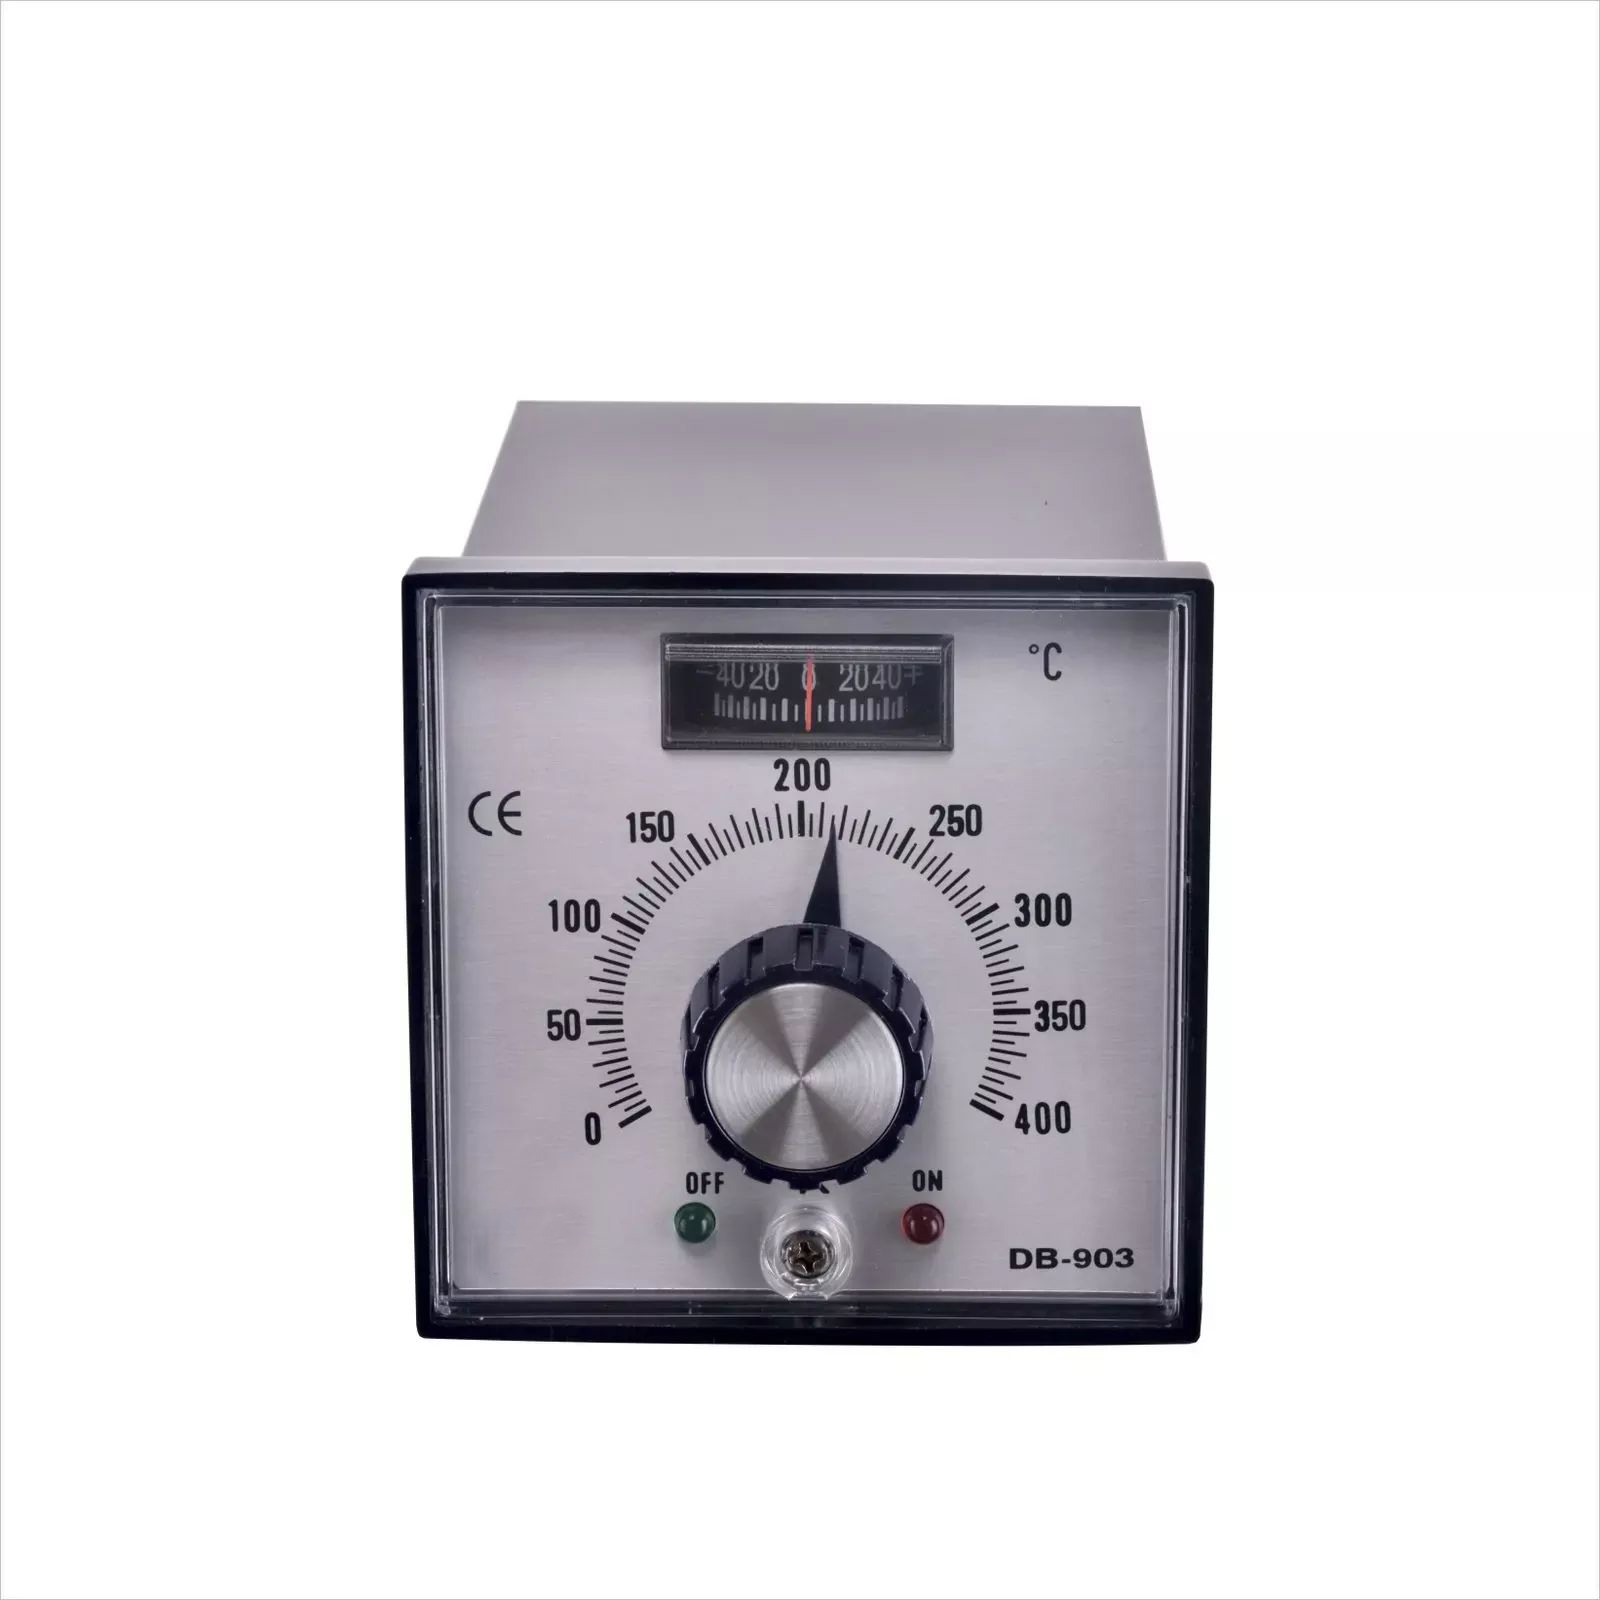 DB-903 96x96mm Analog Temperature Controller with Pointer Knob